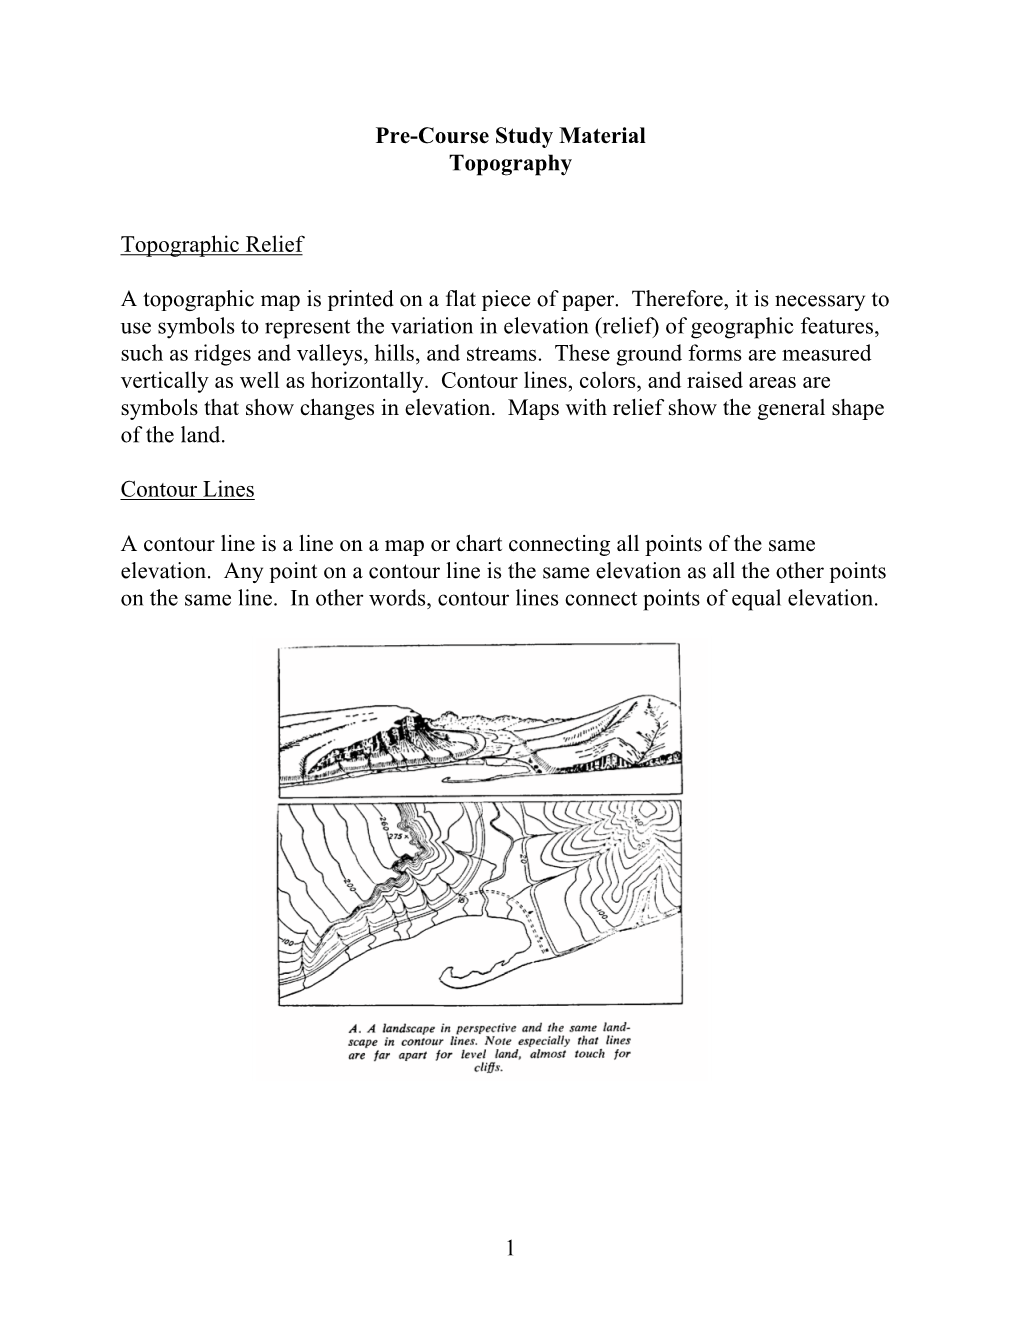 1 Pre-Course Study Material Topography Topographic Relief A